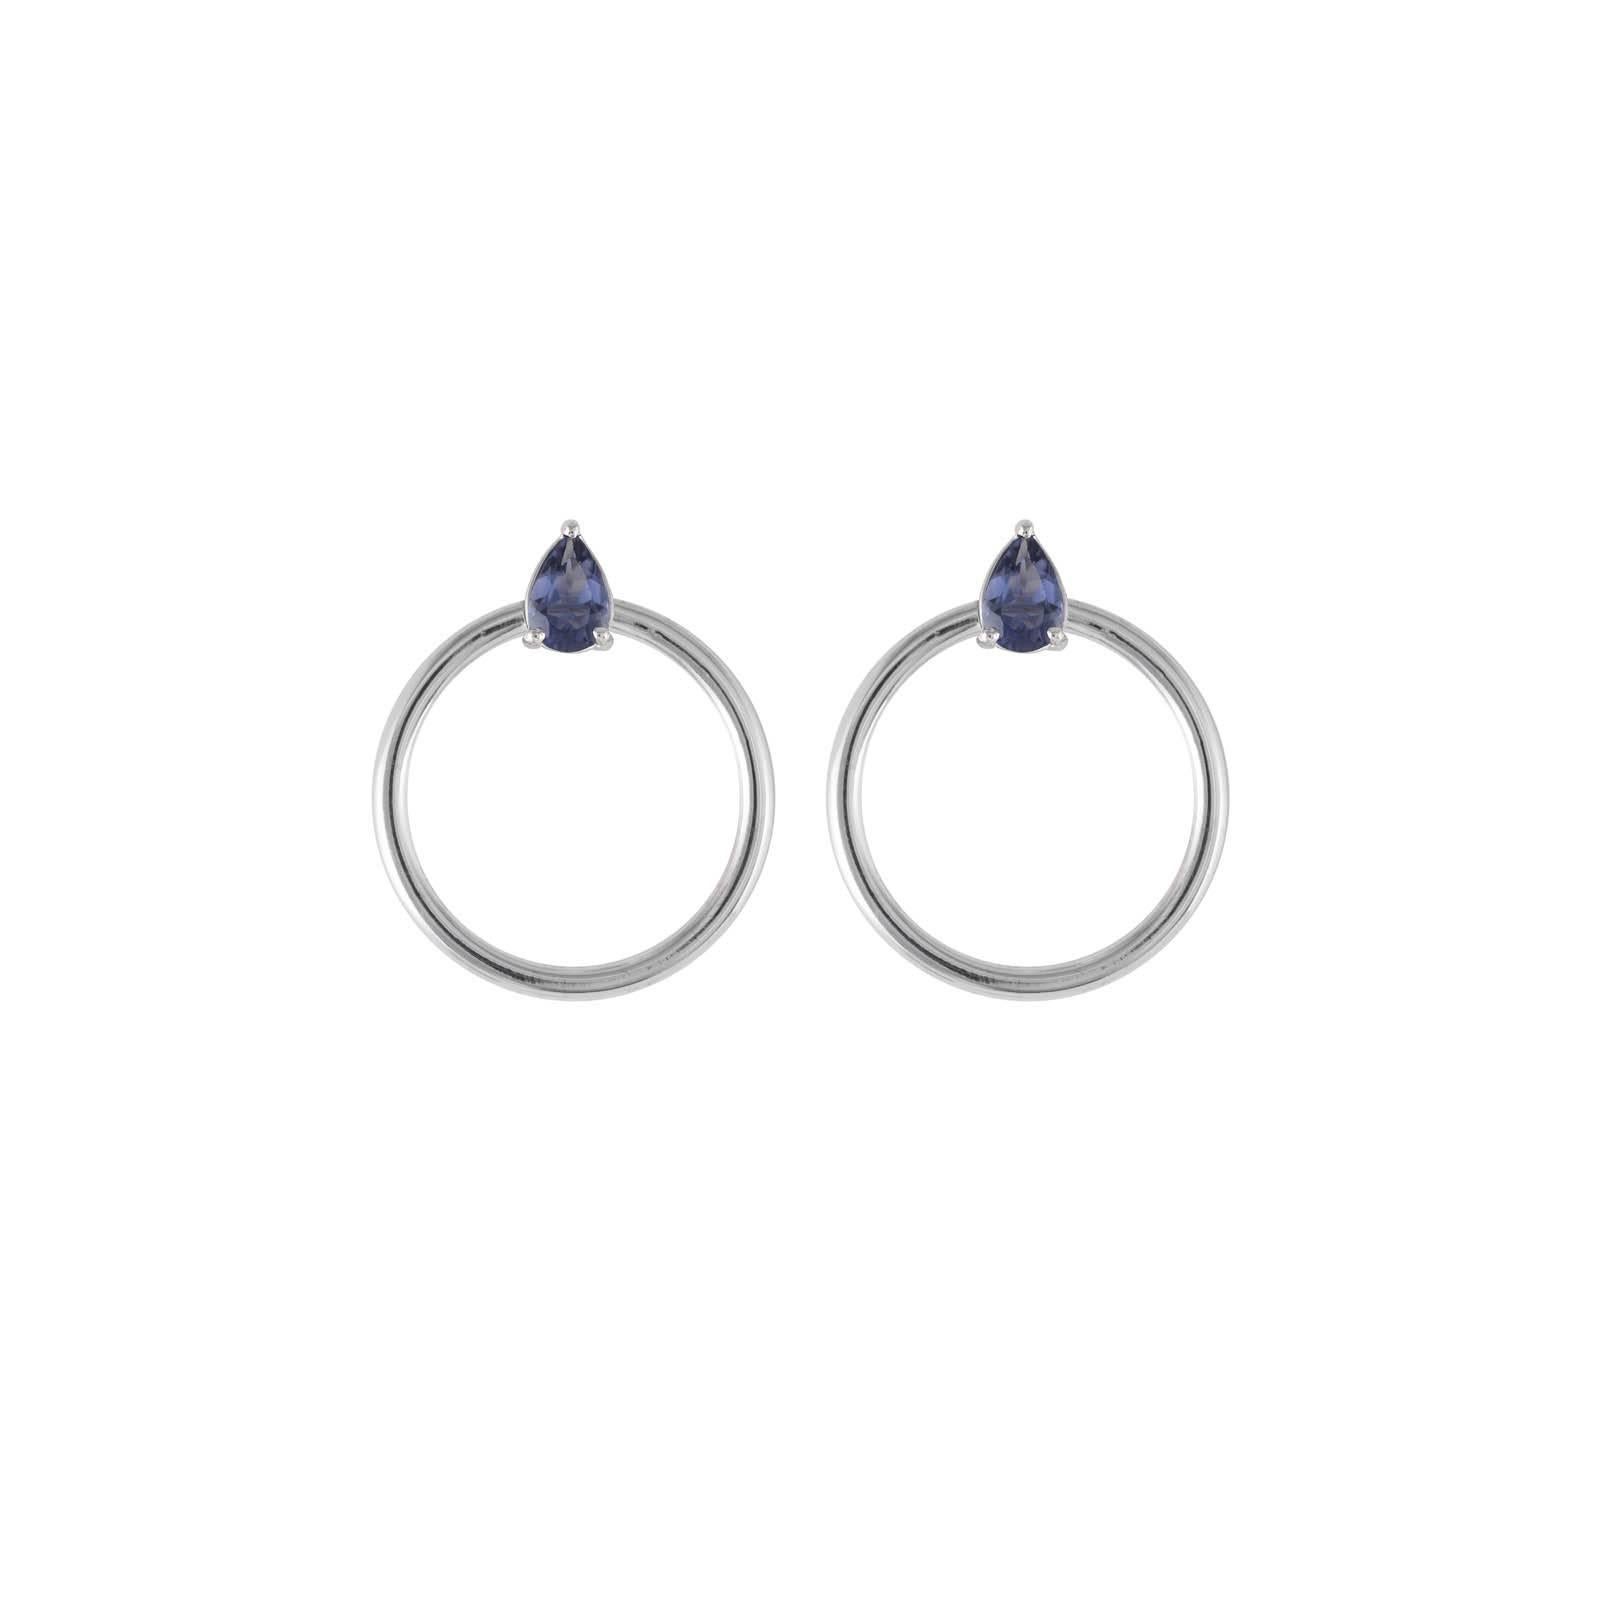 Iolite and white gold small front facing hoop earrings and the Large Orbit Hoop Multiplier earring jackets are here sold as a set and offered at a discount. Simple chic earrings set with pear cut iolite gemstones in 18 karat white gold. Perfectly